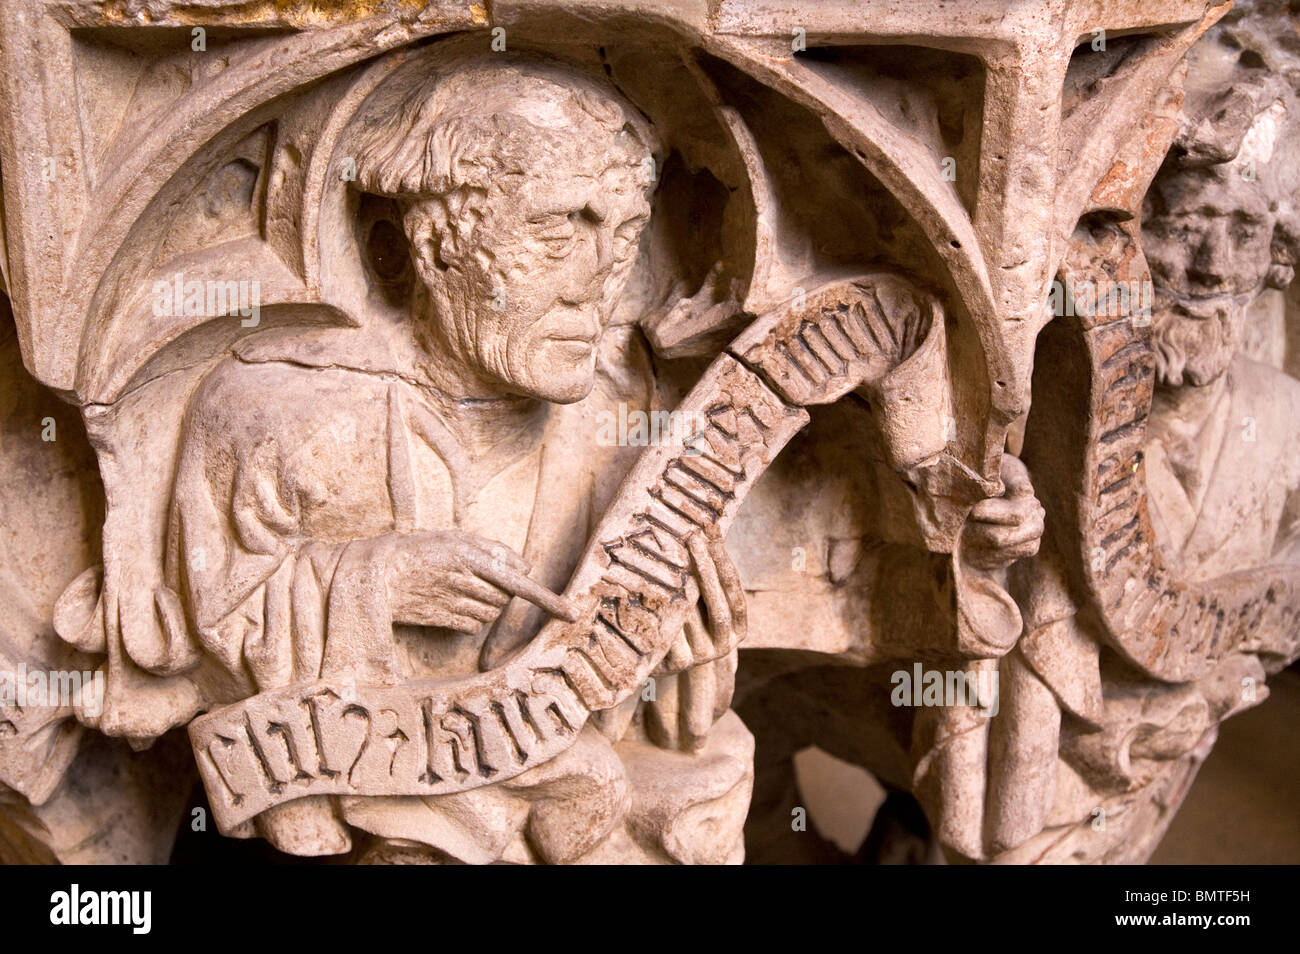 Detail from a medieval sculpture on the font of Ulm Munster in Ulm, Baden-Wuerttemberg, Germany. Stock Photo